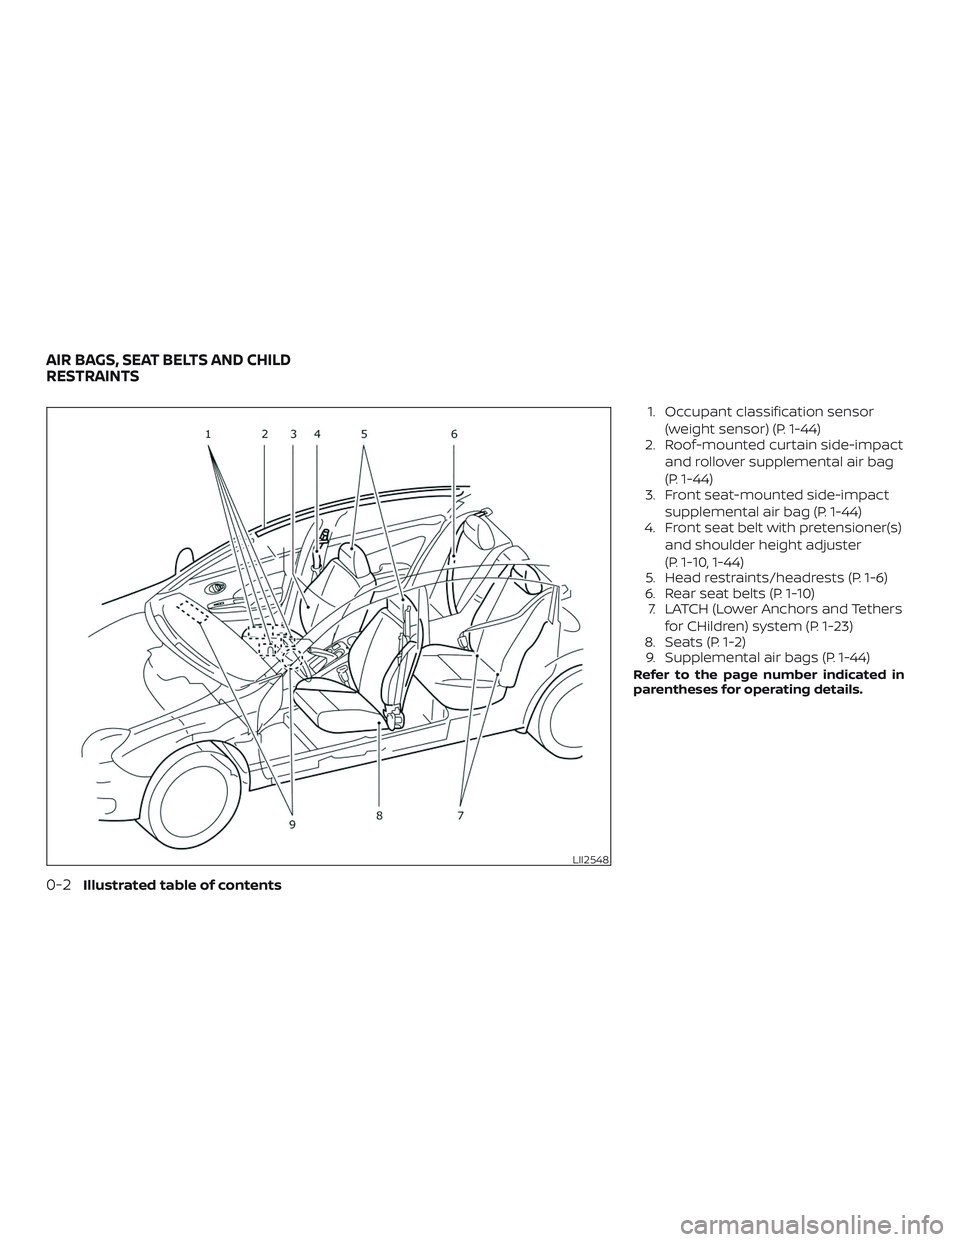 NISSAN MICRA 2023  Owners Manual 1. Occupant classification sensor(weight sensor) (P. 1-44)
2. Roof-mounted curtain side-impact
and rollover supplemental air bag
(P. 1-44)
3. Front seat-mounted side-impact
supplemental air bag (P. 1-